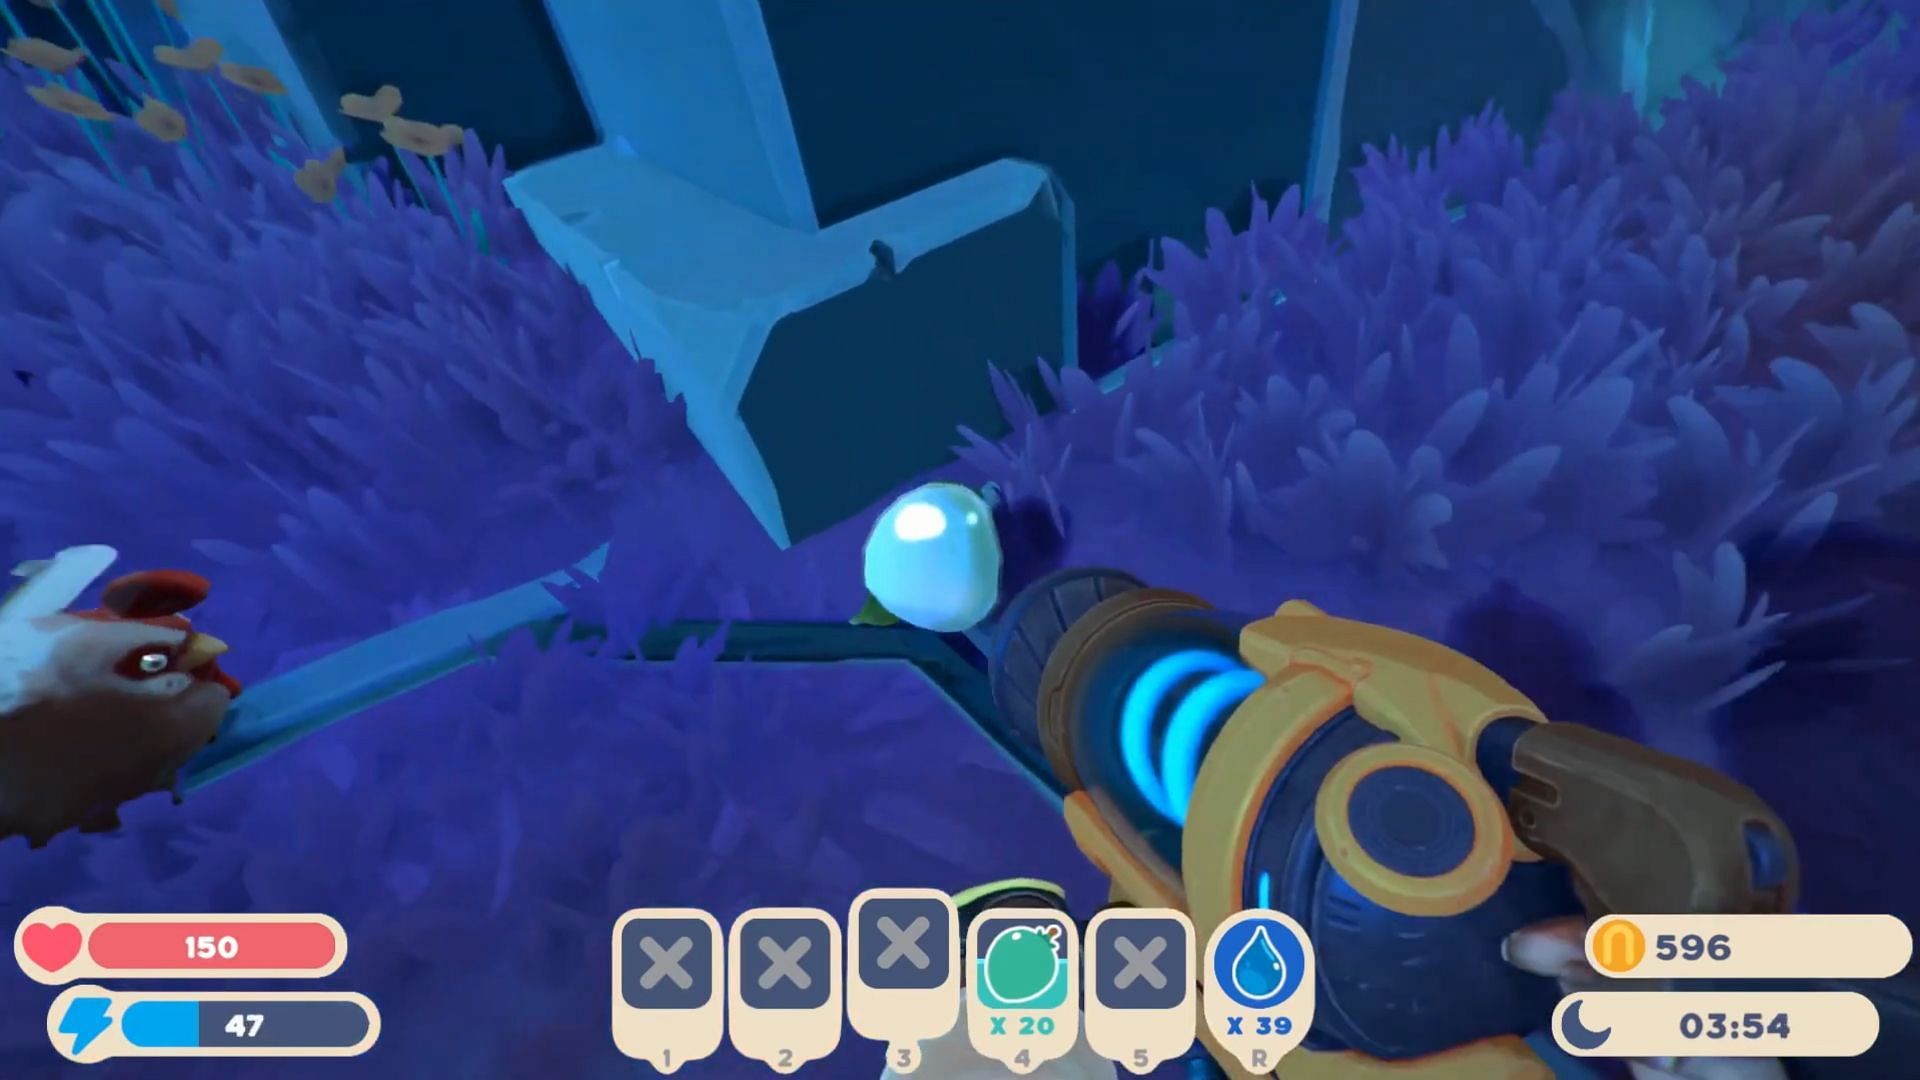 Slime Rancher 2 Wiki (Sep) Essential Points Here!